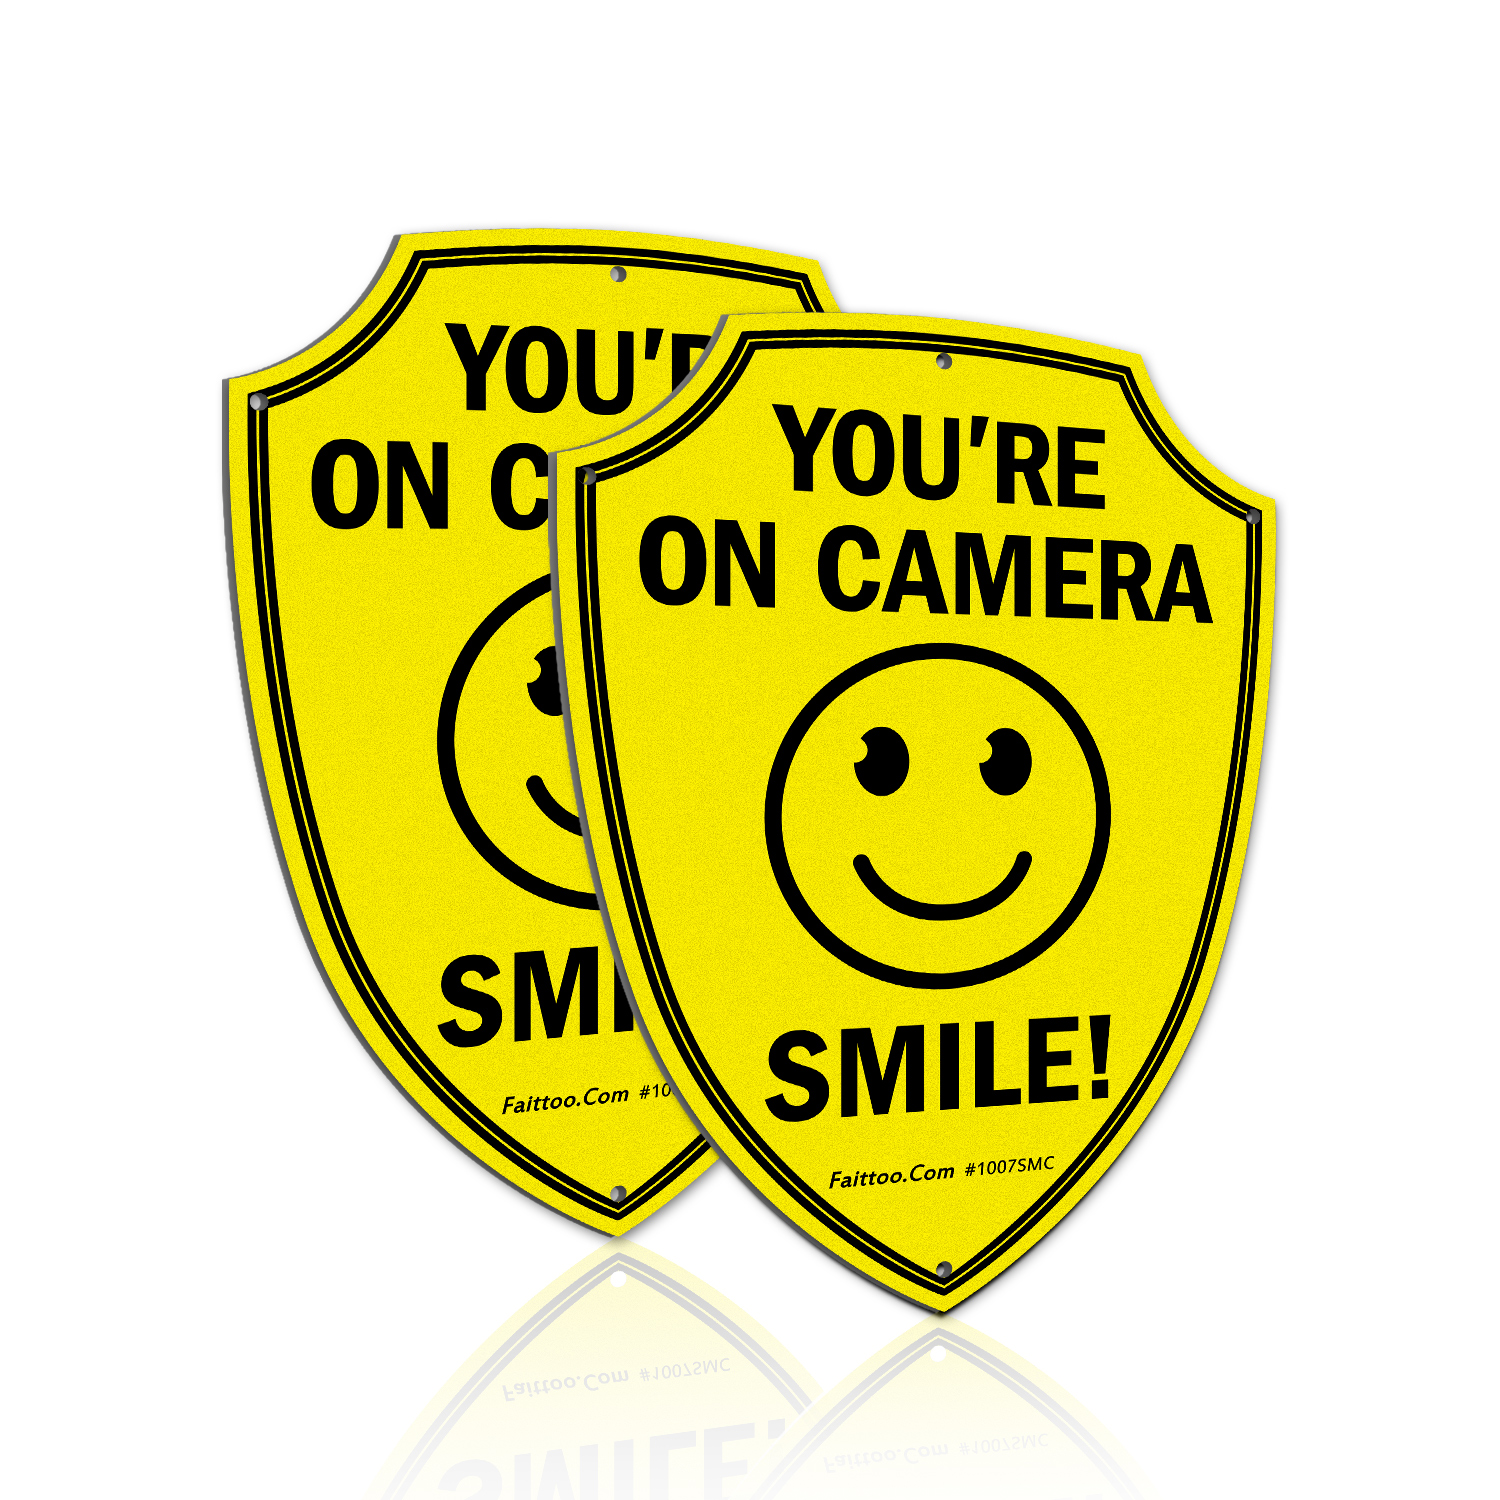 Faittoo Smile You're On Camera Sign, Video Surveillance Signs Outdoor, 2-Pack, 9.6 x 6.8 Inch Reflective Aluminum Warning Sign for Home Business CCTV Security Camera, Weather Resistant, Shield Shape